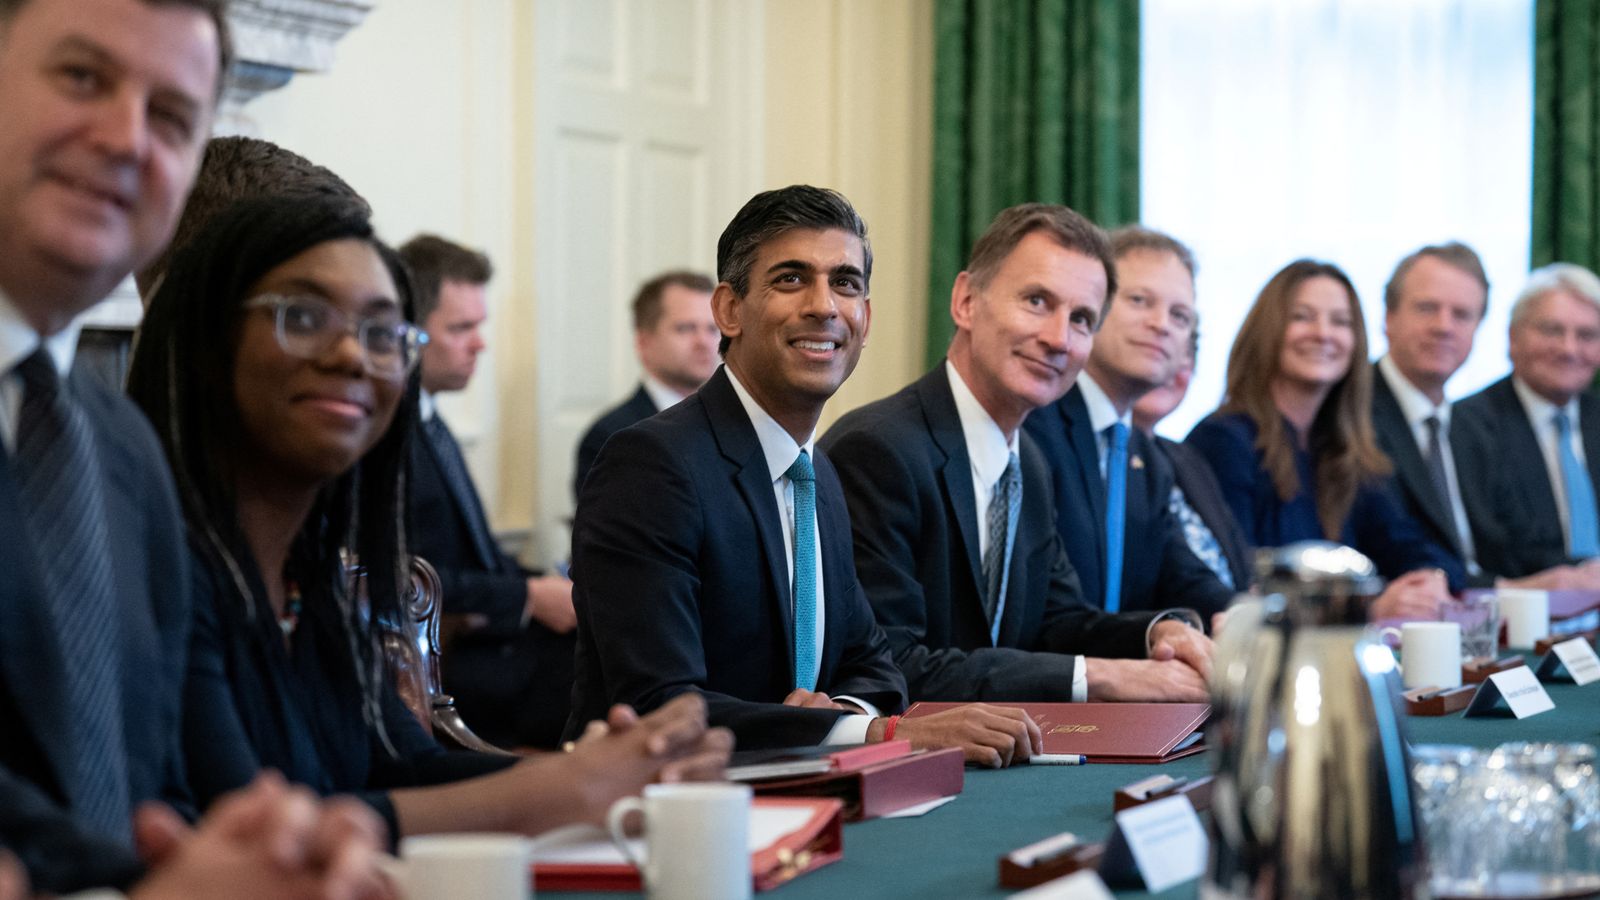 Five problems PM Rishi Sunak faces on his uphill battle to lead the Tories